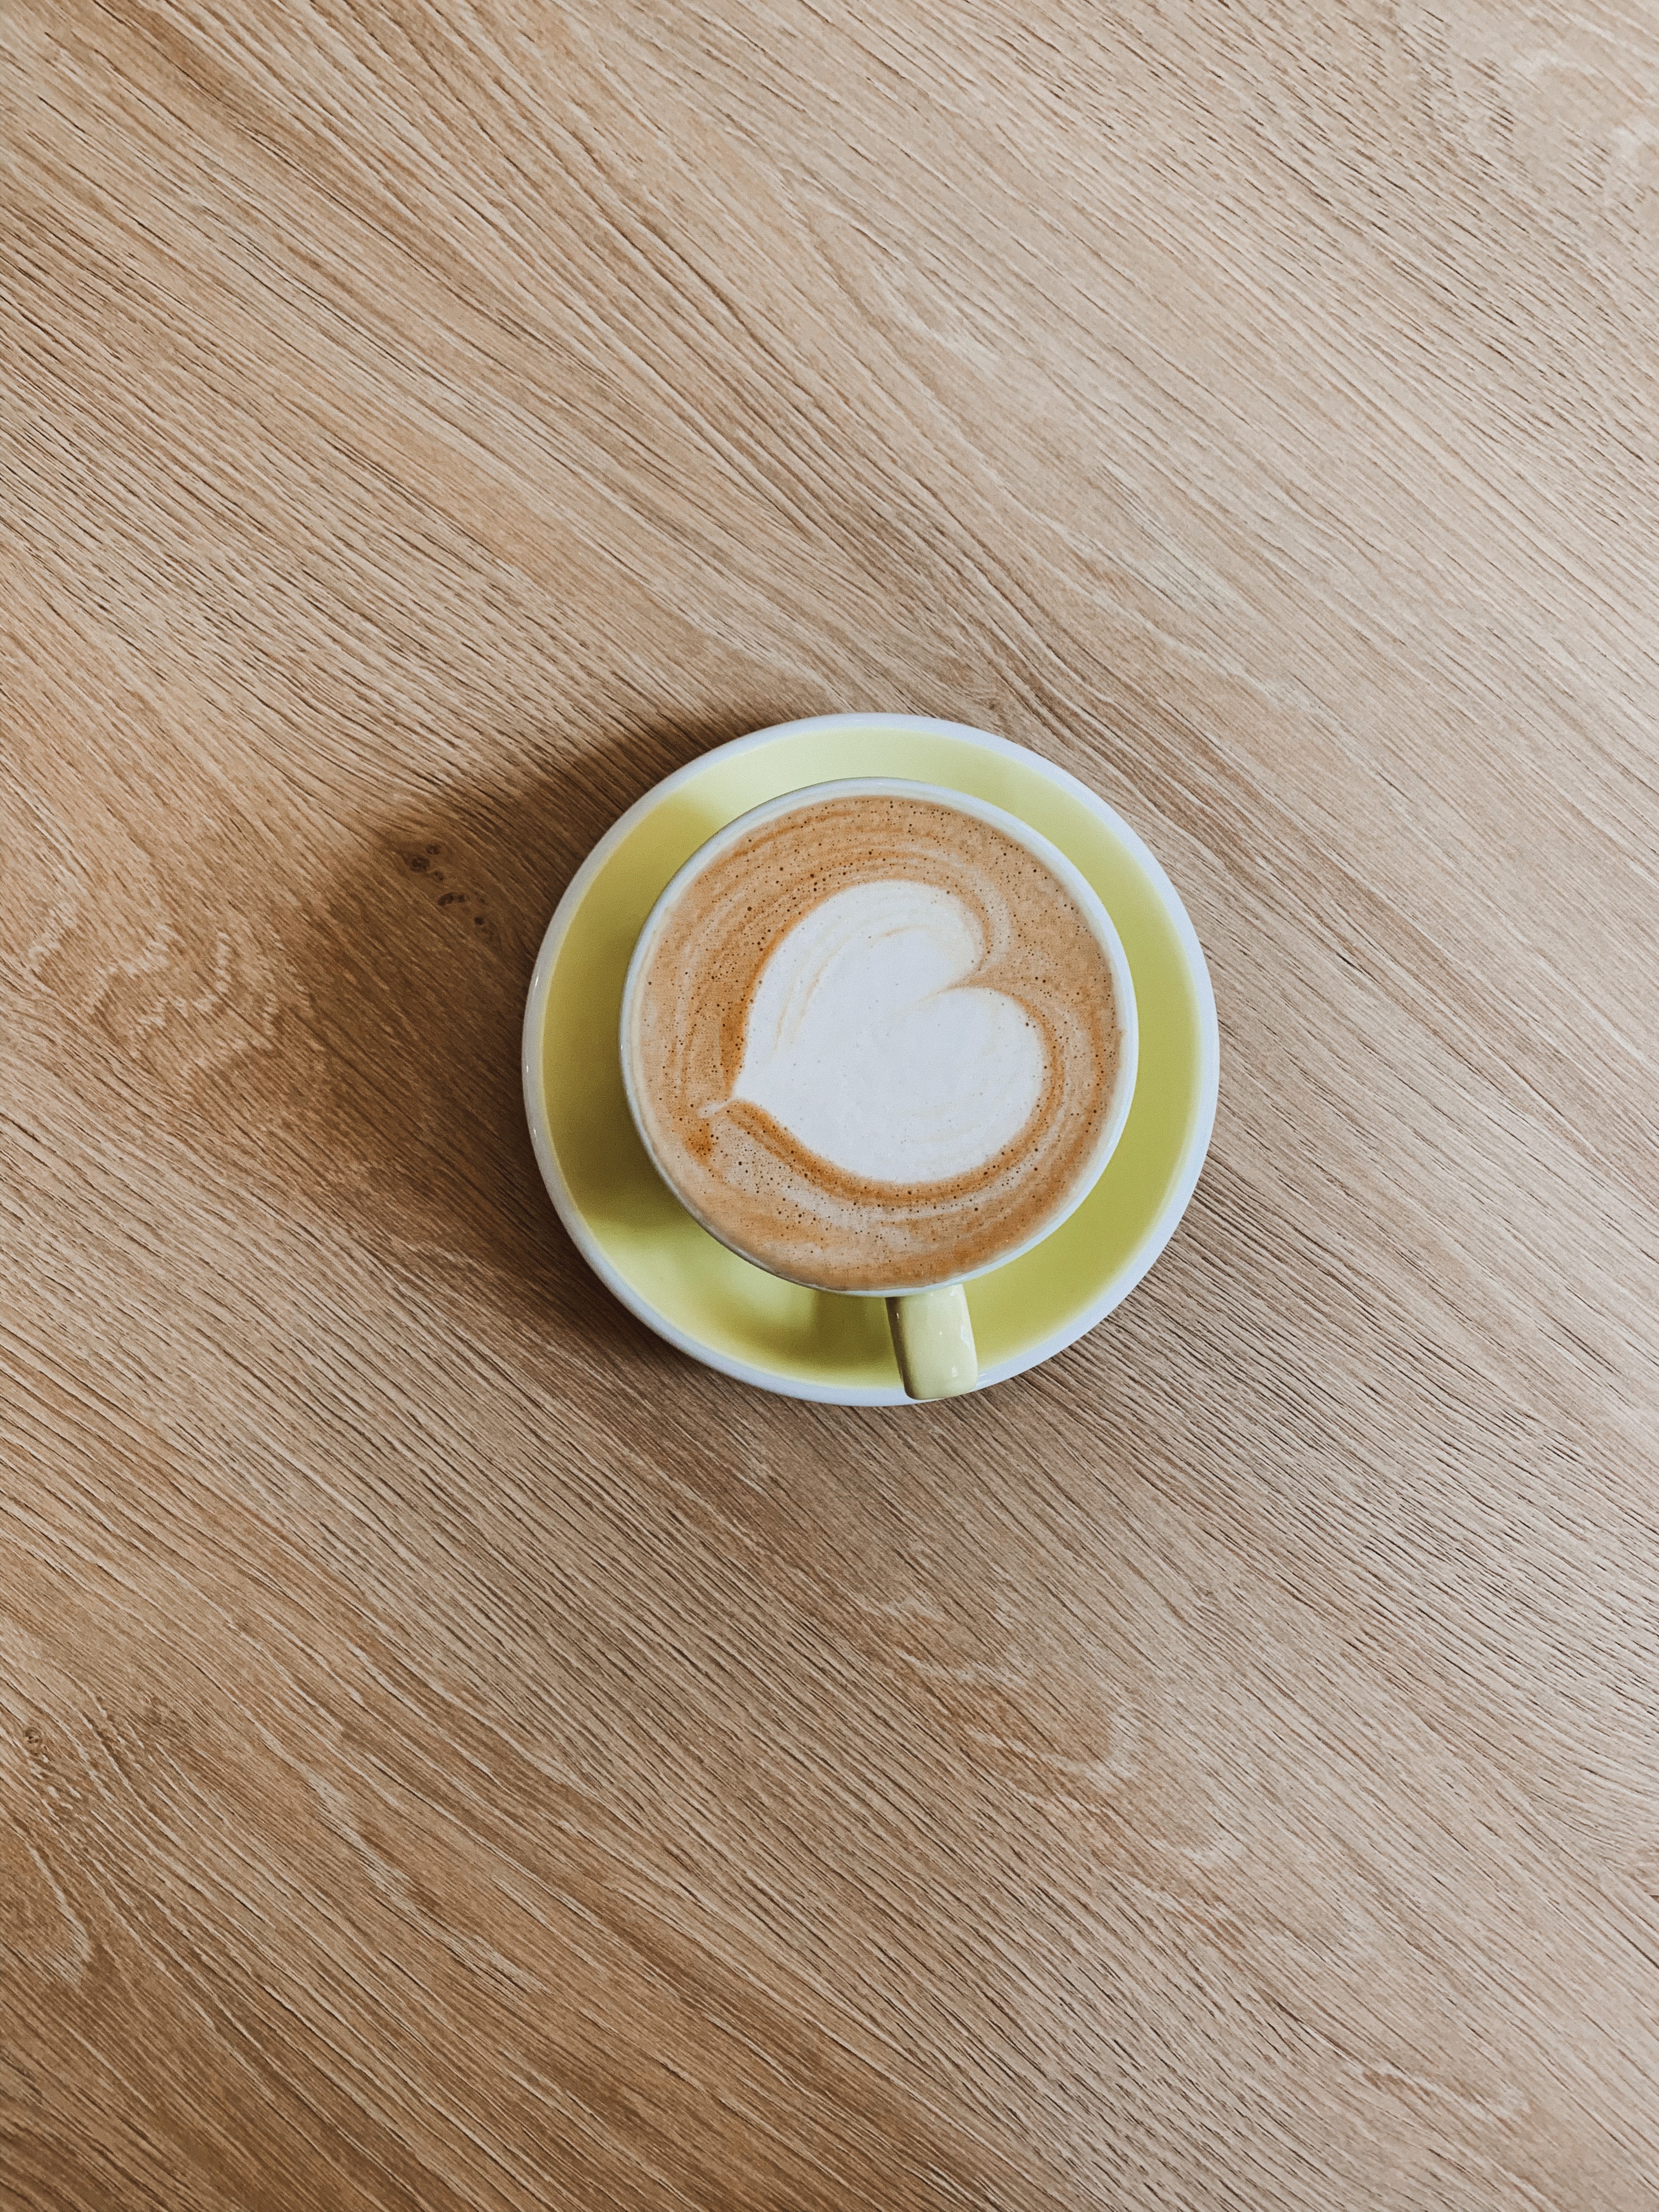 152915 Screensavers and Wallpapers Cappuccino for phone. Download food, wood, wooden, pattern, cup, cappuccino, drink, beverage pictures for free